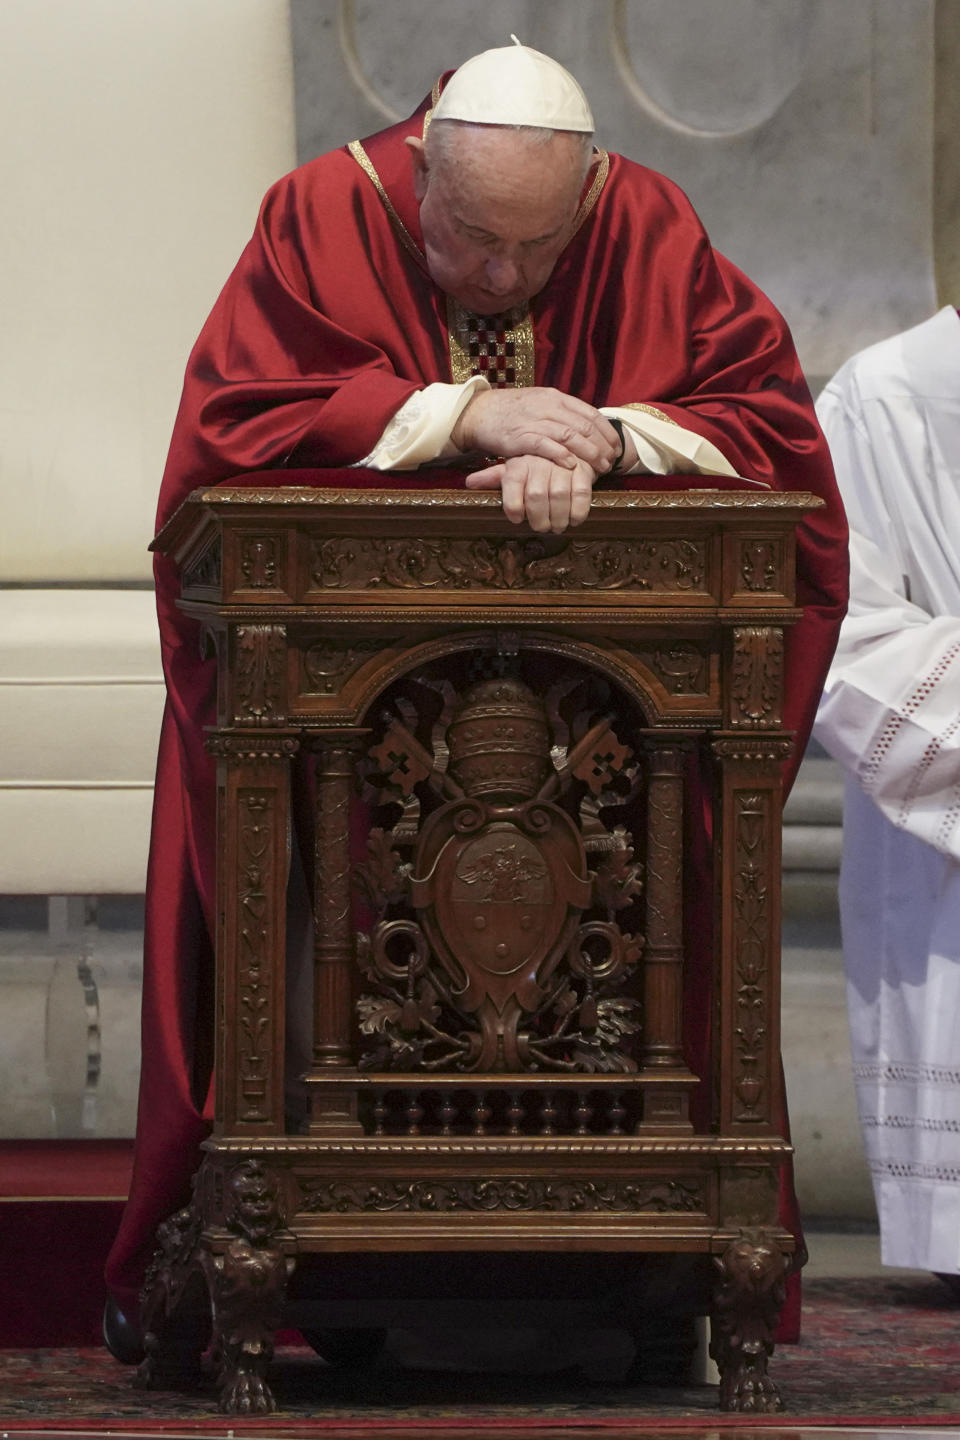 Pope Francis kneels during a Mass for the Passion of Christ, at St. Peter's Basilica, at the Vatican, Friday, April 10, 2020. The new coronavirus causes mild or moderate symptoms for most people, but for some, especially older adults and people with existing health problems, it can cause more severe illness or death. (AP Photo/Andrew Medichini, Pool)